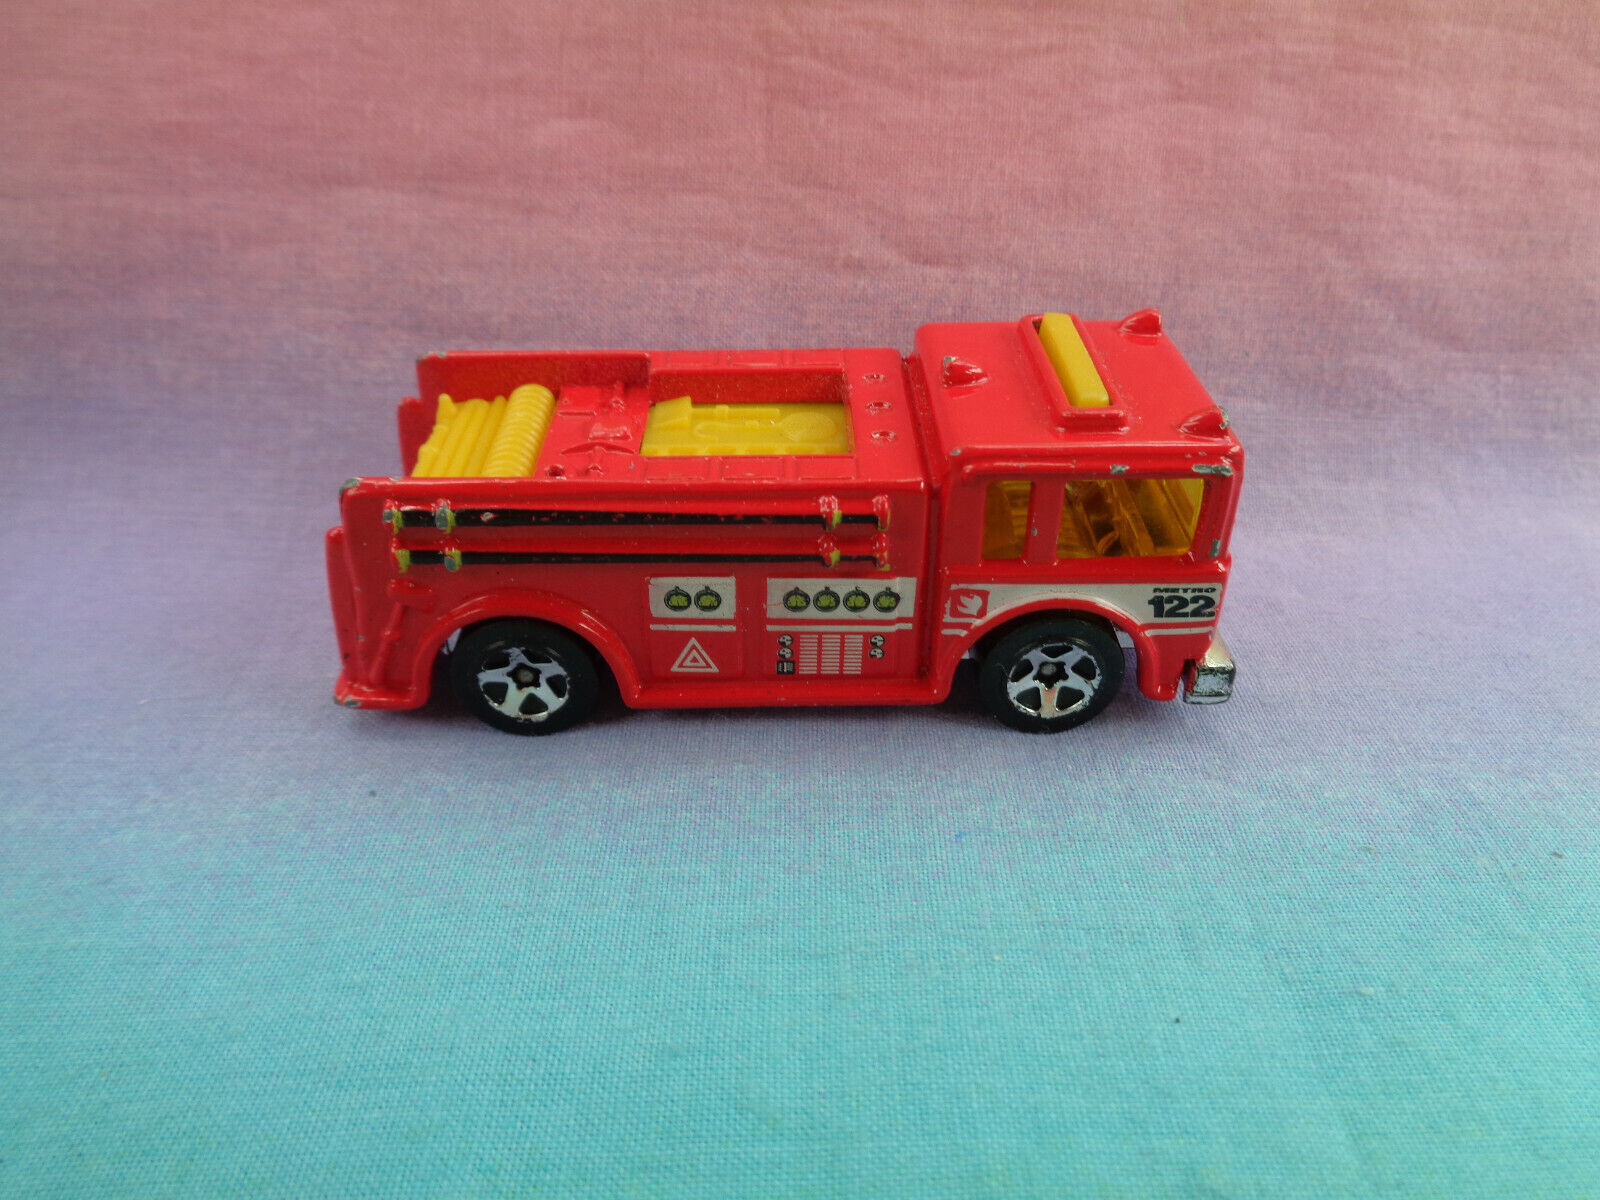 Vintage 1976 Hot Wheels Mattel Red & Yellow Fire Truck Metro 122 - as is - $7.90